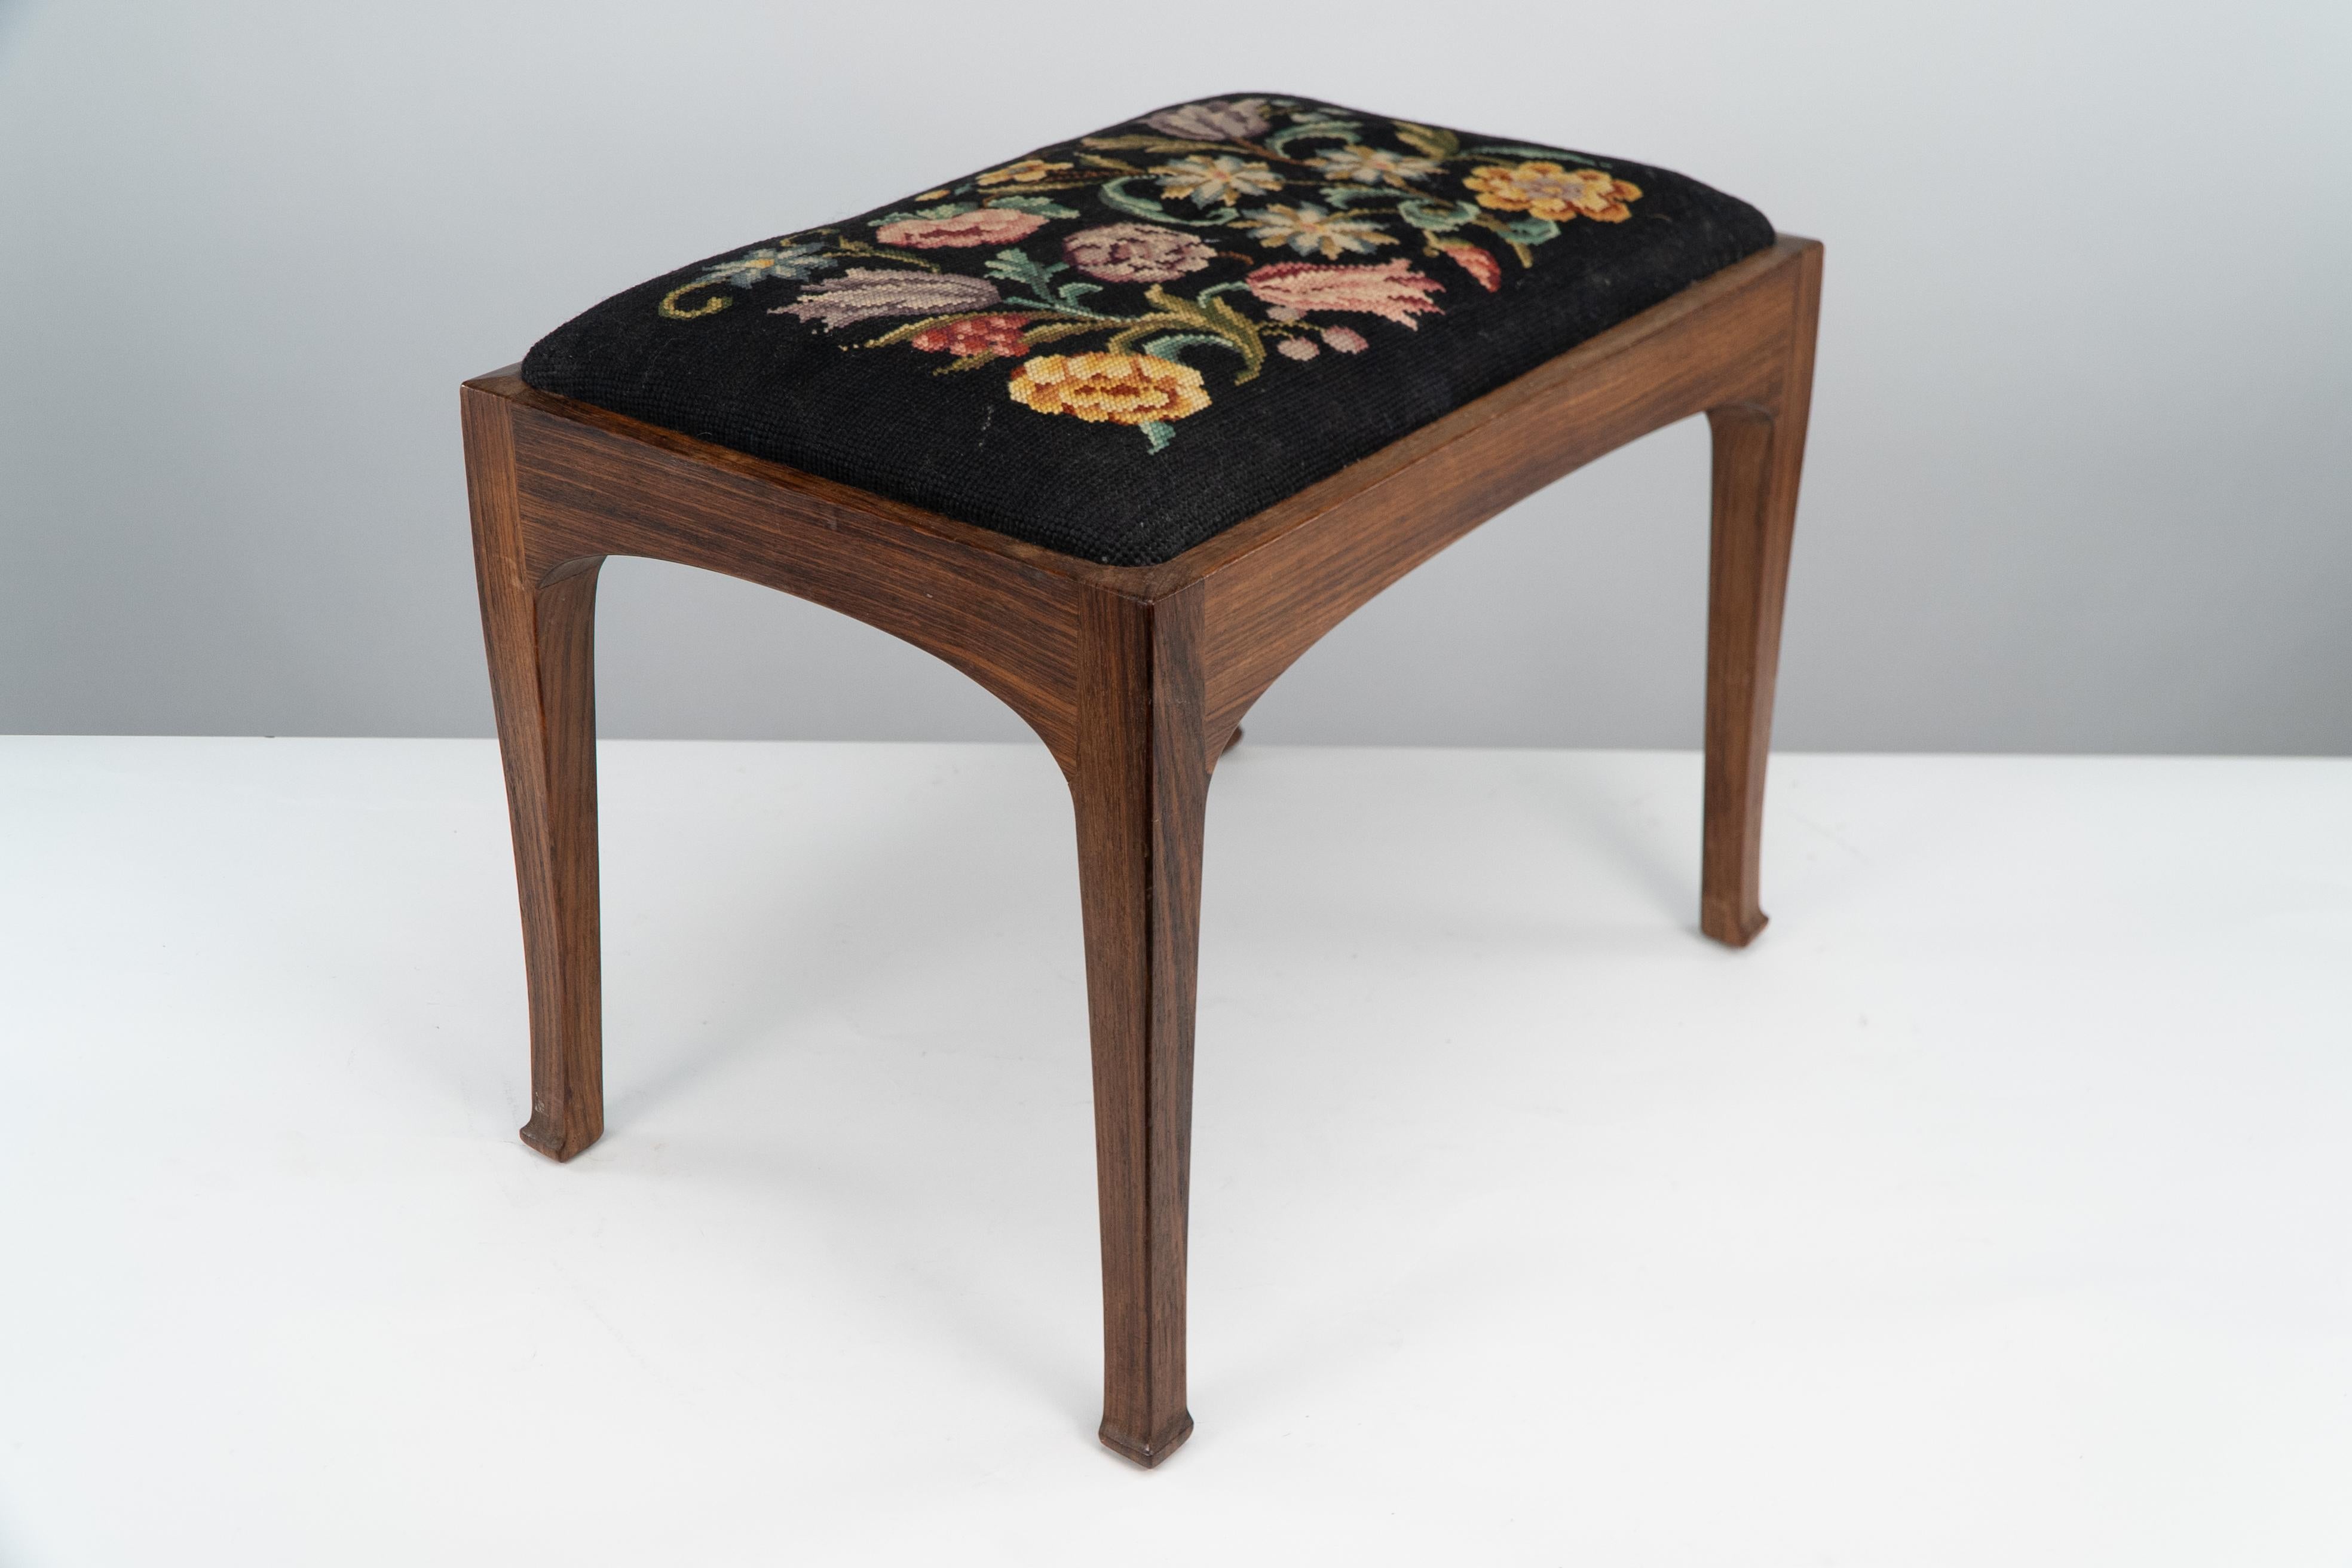 English Edward Barnsley. A Cotswold School walnut stool with the original tapestry seat. For Sale